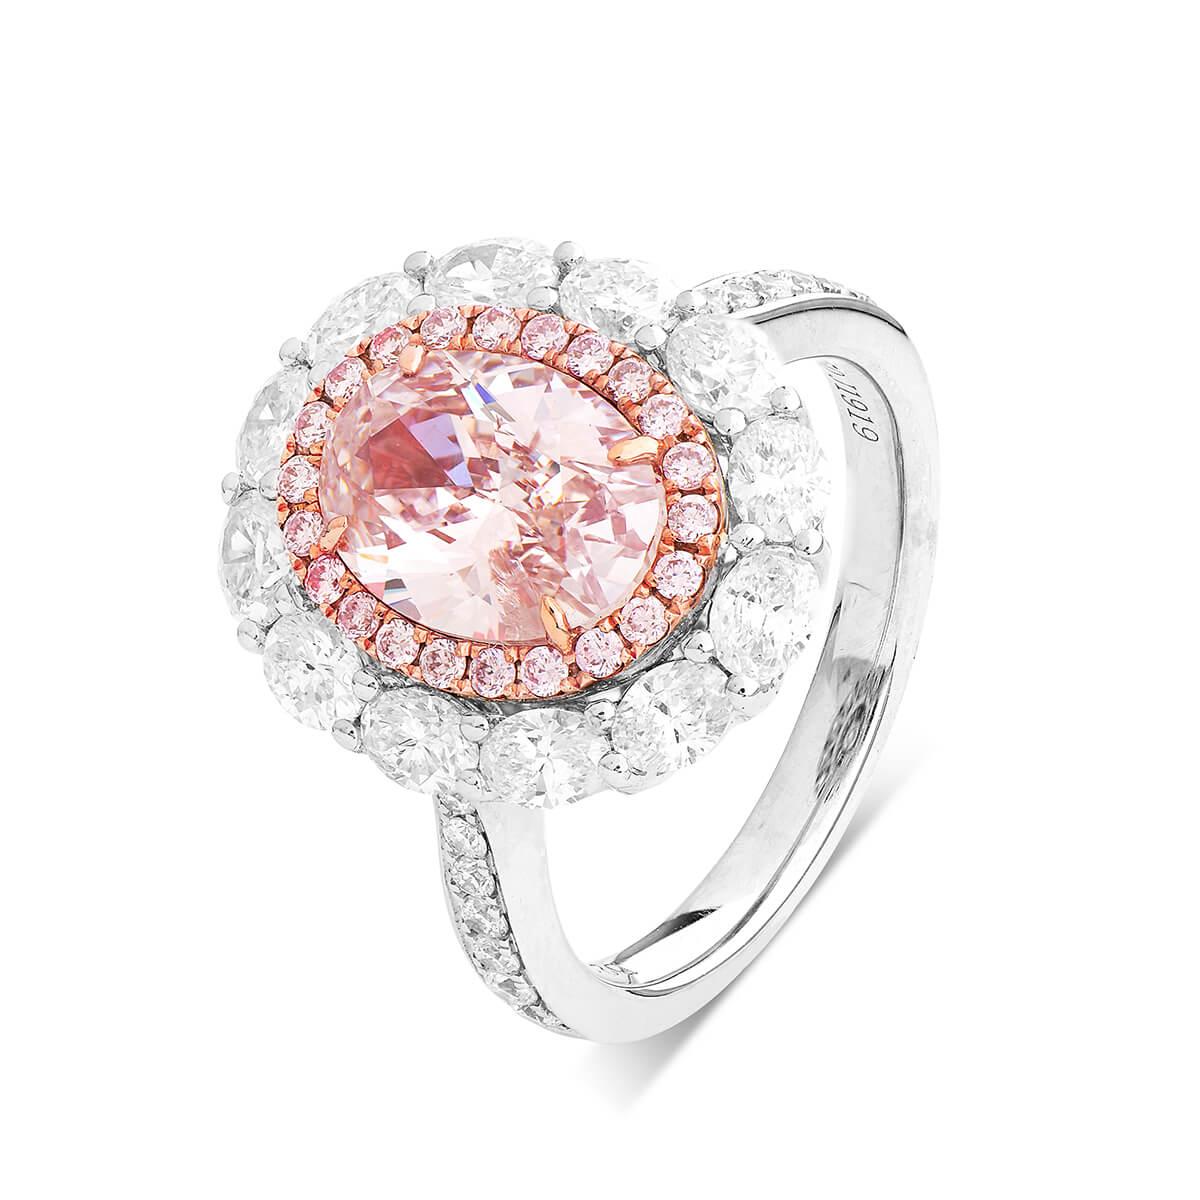 Natural Light Pink Diamond 2.01 Carat, surrounded by White Diamonds, all untreated. Making up a total of 3.50 Carats. Expertly crafted with 18 Karat White Gold. Oval shape. 
GIA certified. 
This Item can be adjusted, resized and customized.